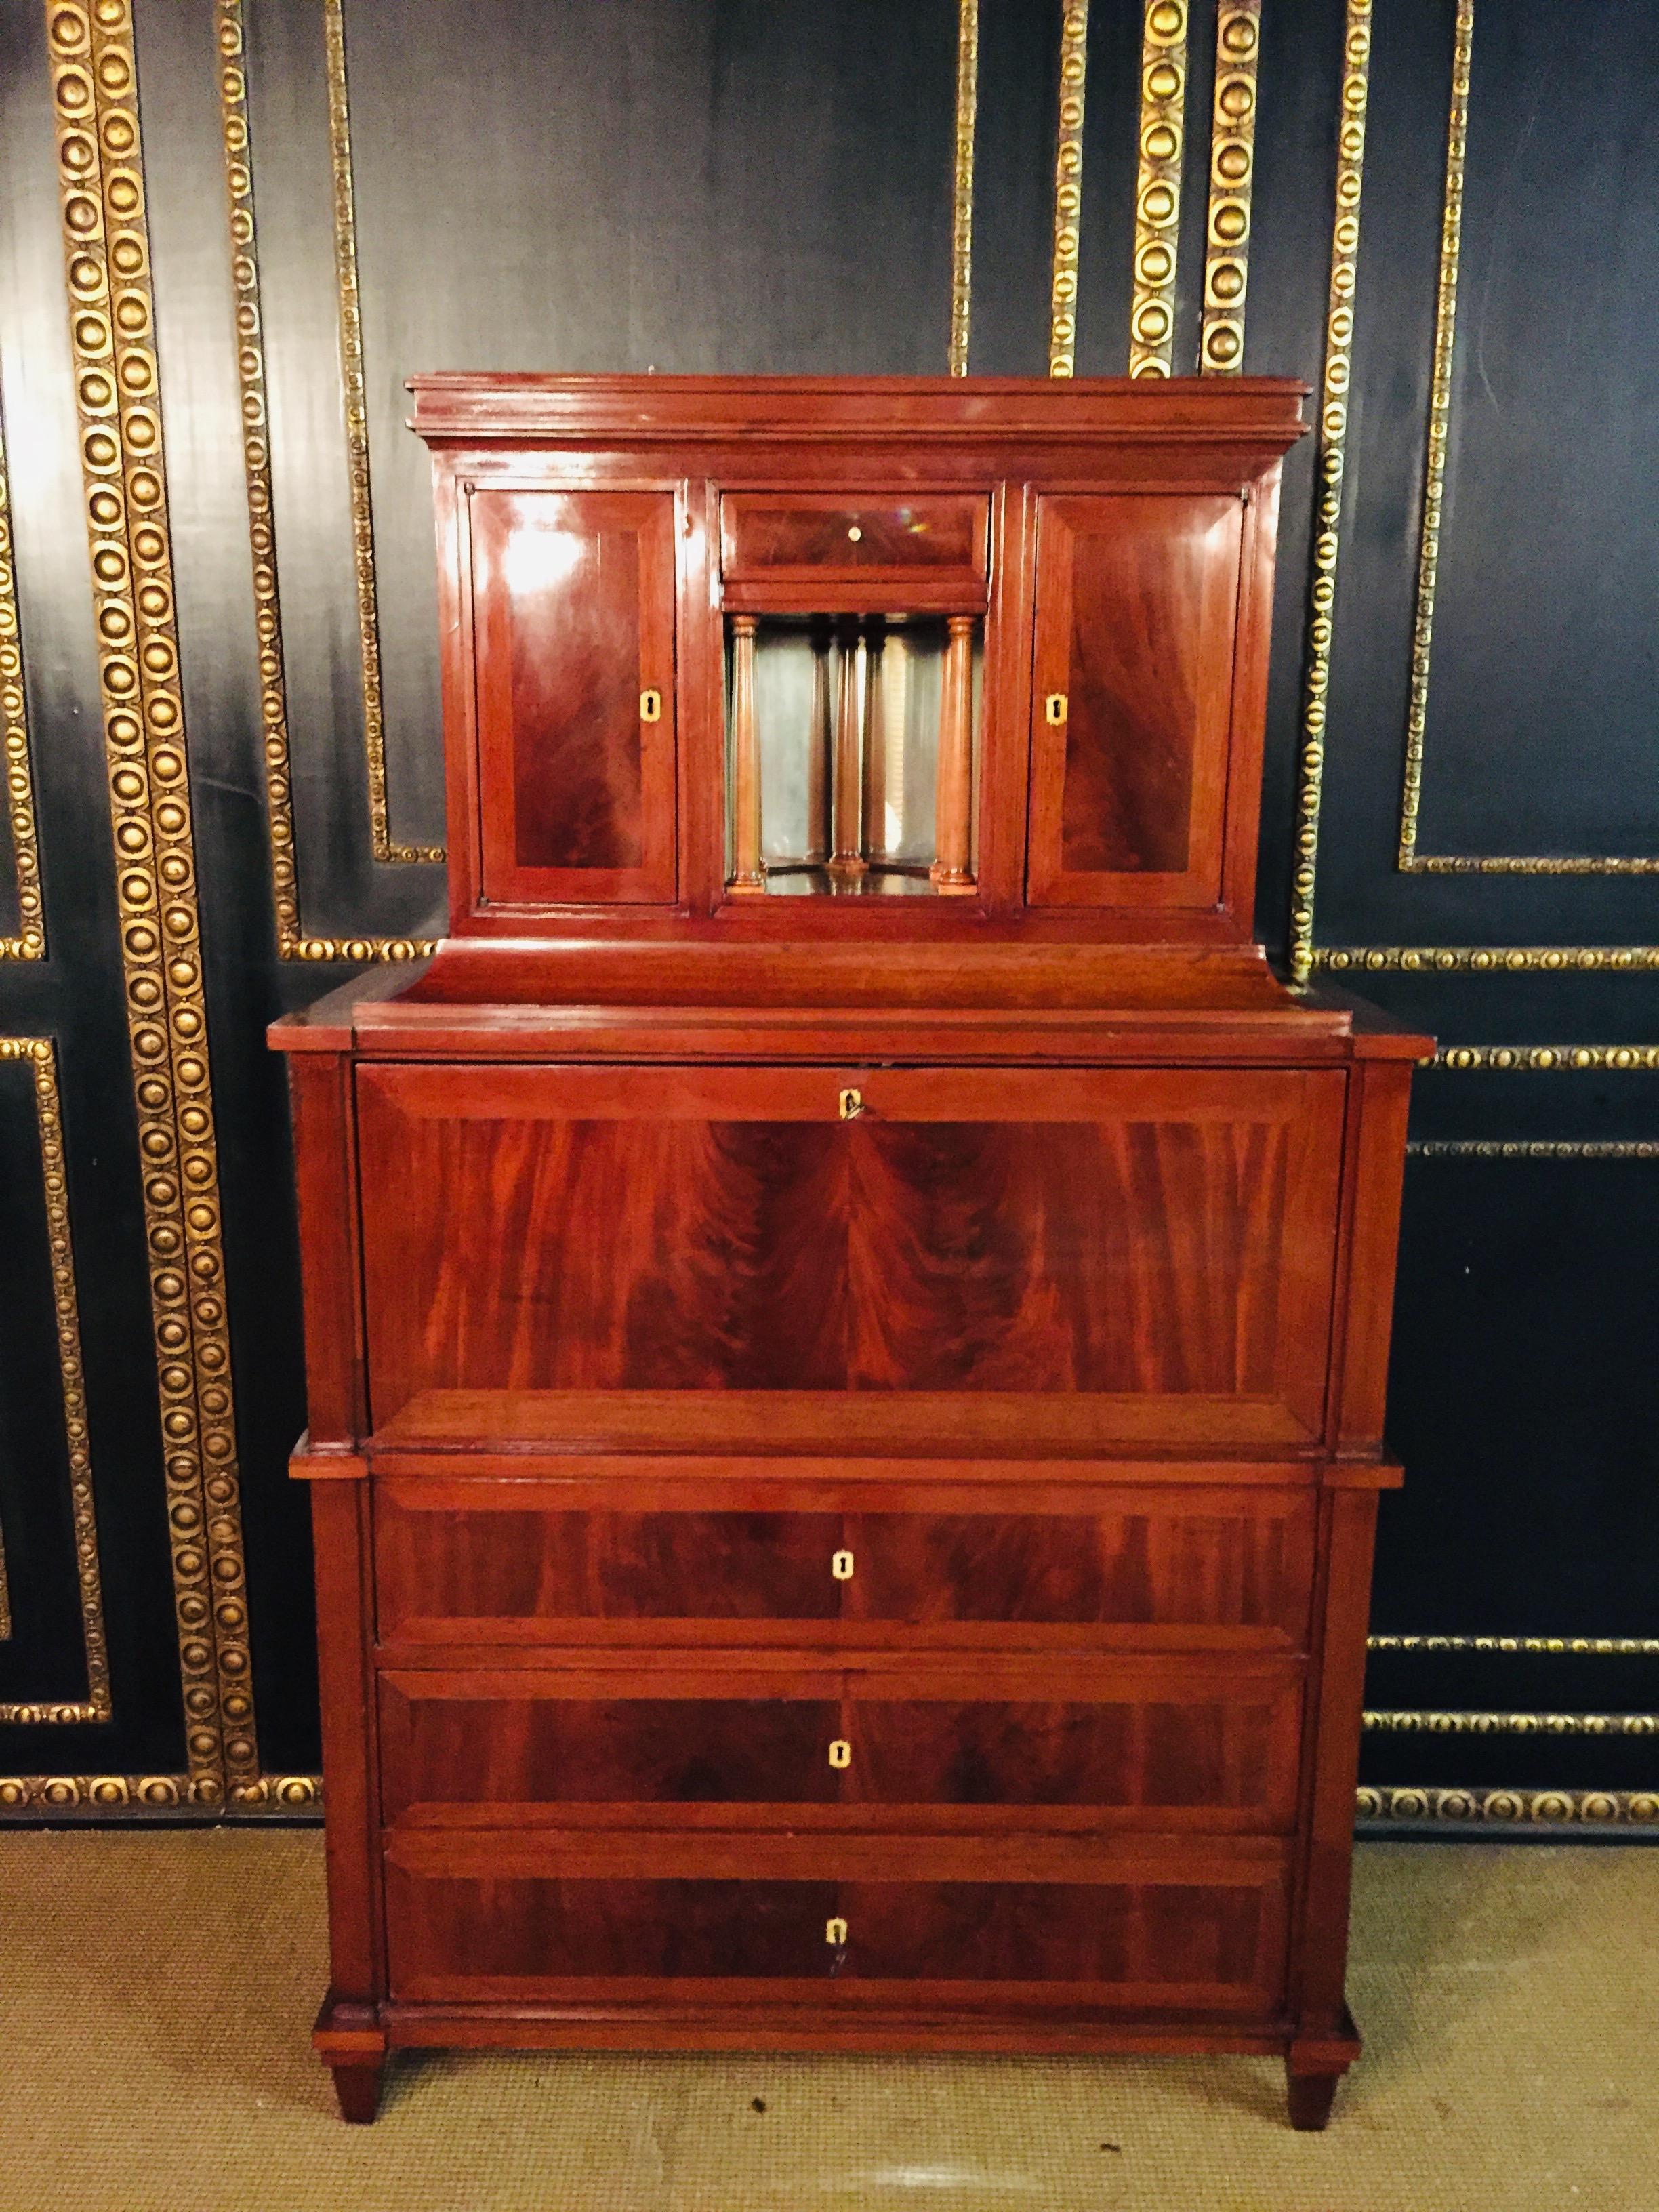 High-quality Cuba mahogany on solid oak . Rectangular body on pointed legs. Provided with three drawers . Straight writing tablet, behind it architectural interior with 5 columns. Set back two-door attachment with profiled cornice.
Beautiful patina,